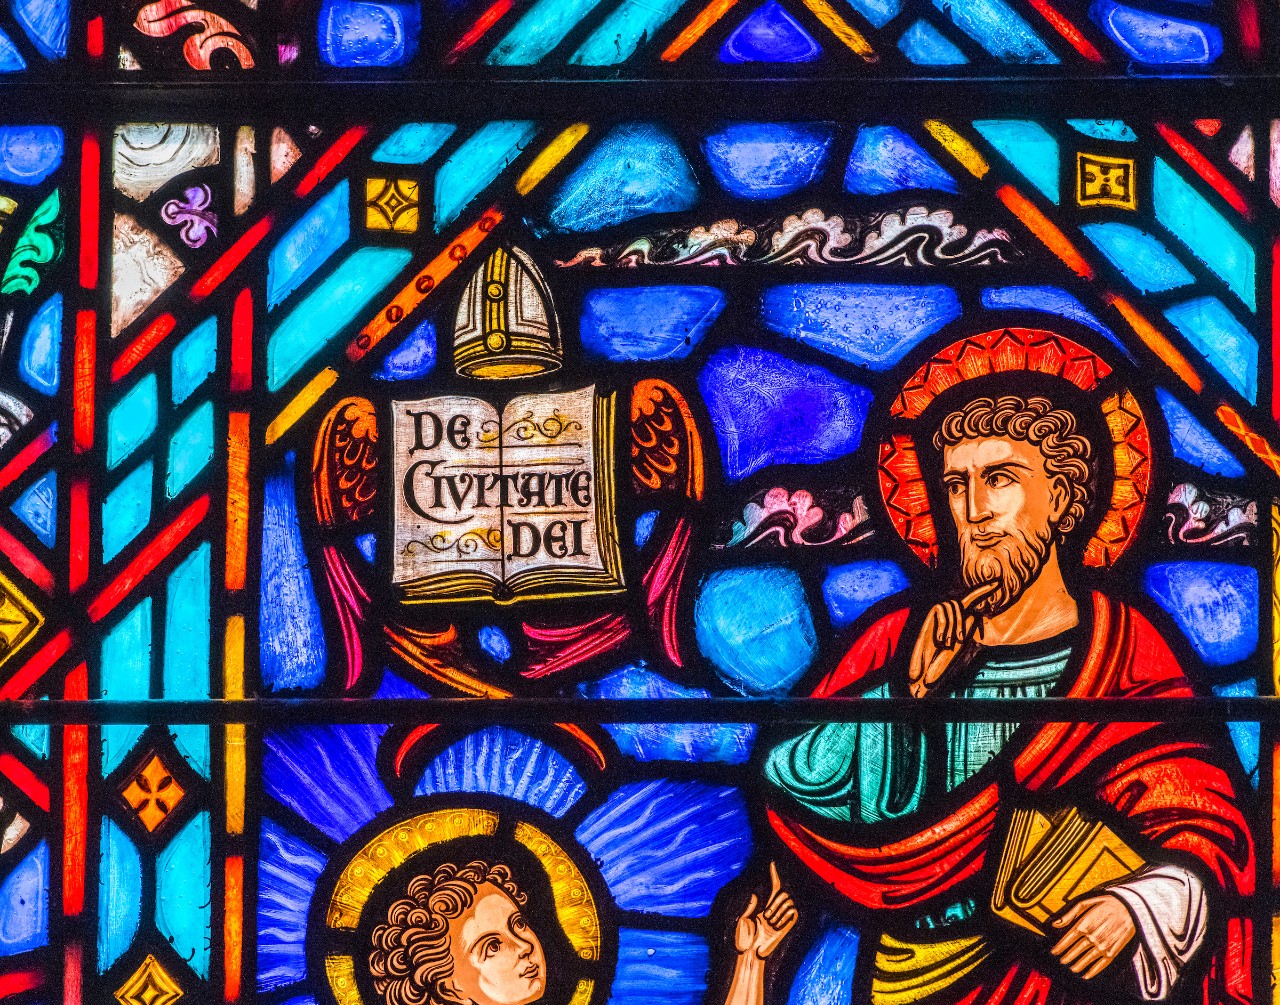 stained glass windows showing Agustine and his volume "City of God"